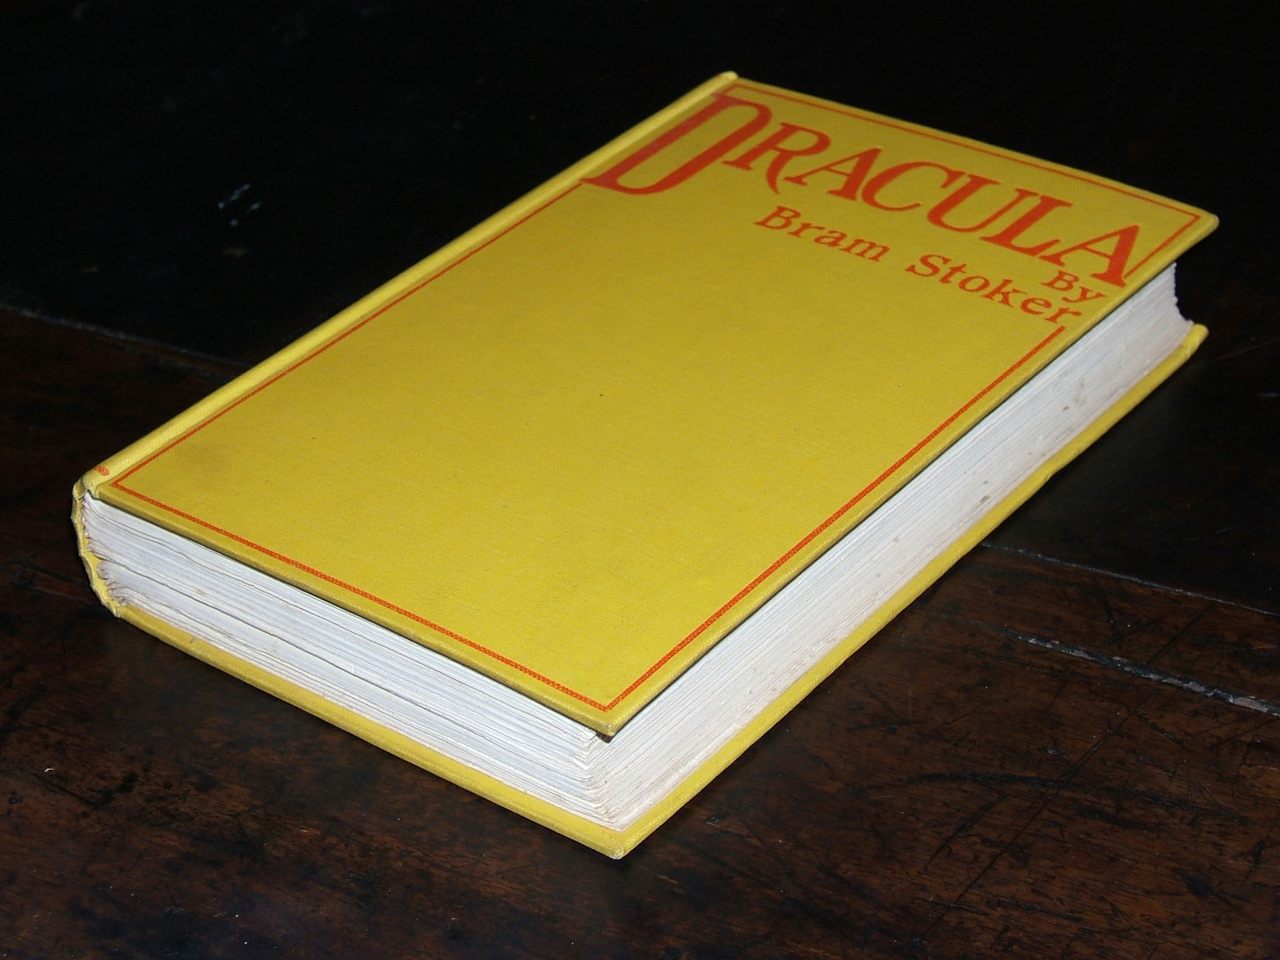 A first edition of Dracula, published in 1897, in the Rosenbach collection.